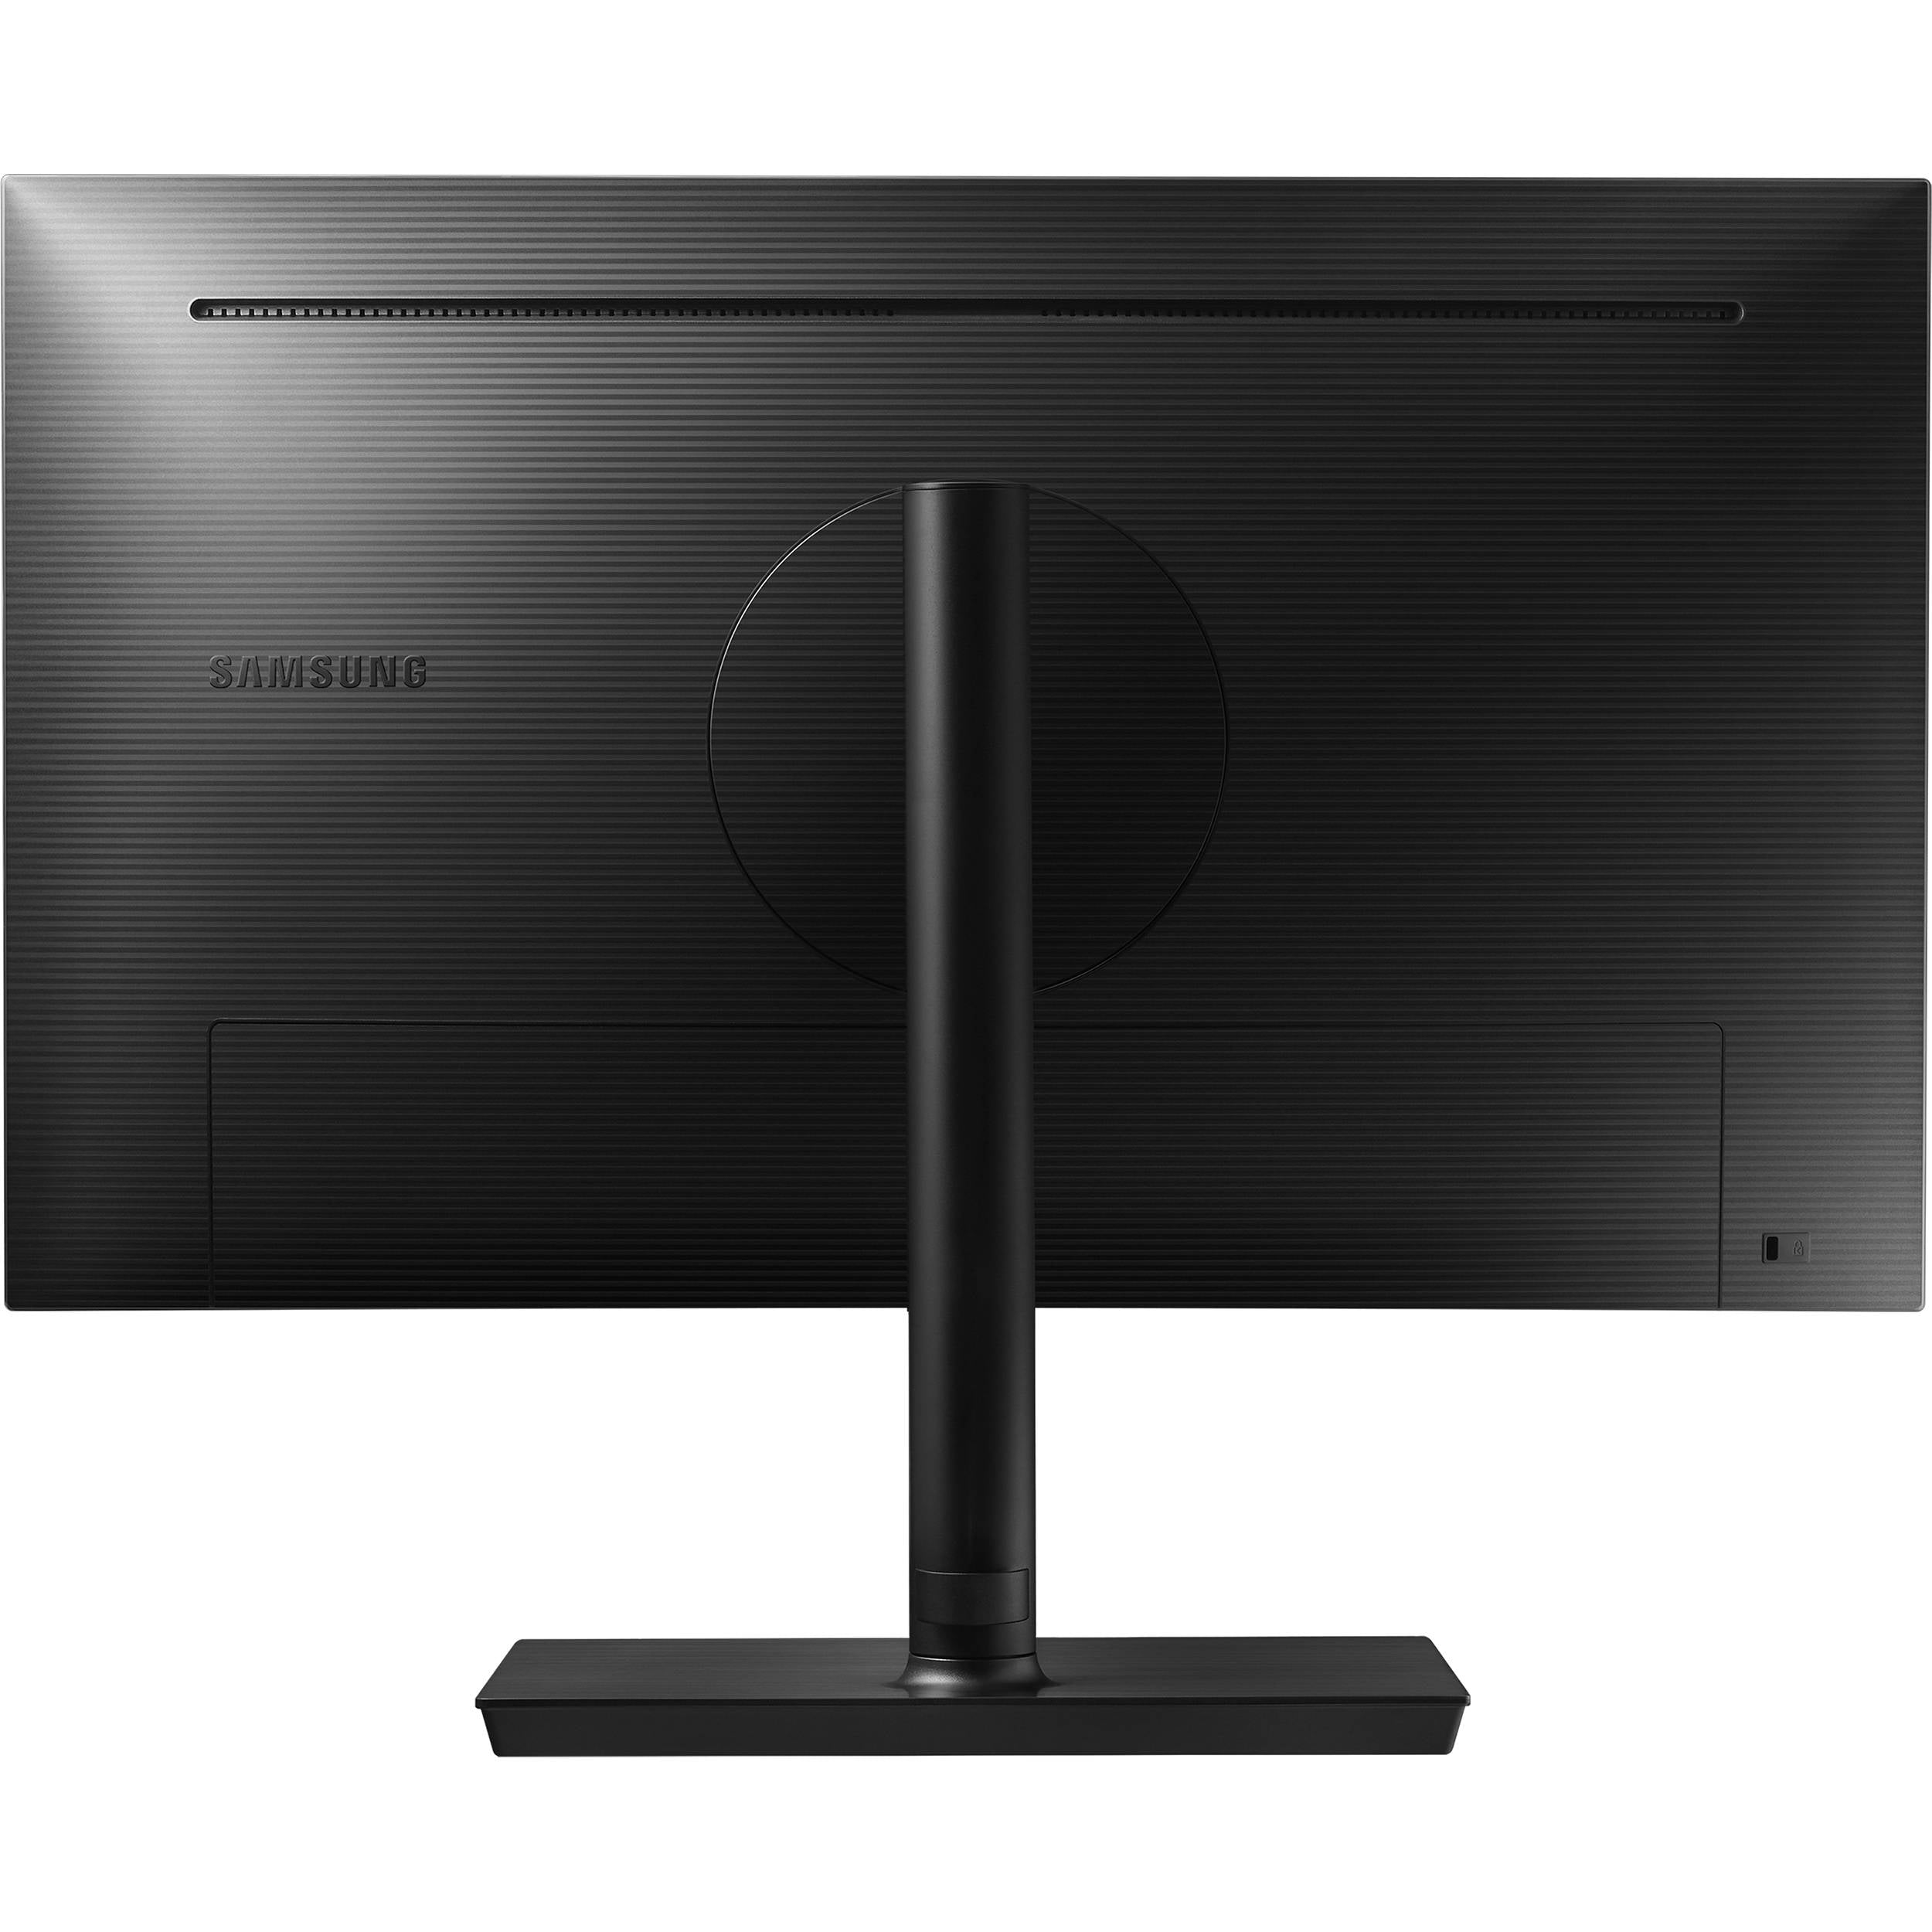 Samsung LS27H650FDNXZA 27" SH650 Series 1920 x 1200 60Hz LED Monitor for Business - Certified Refurbished